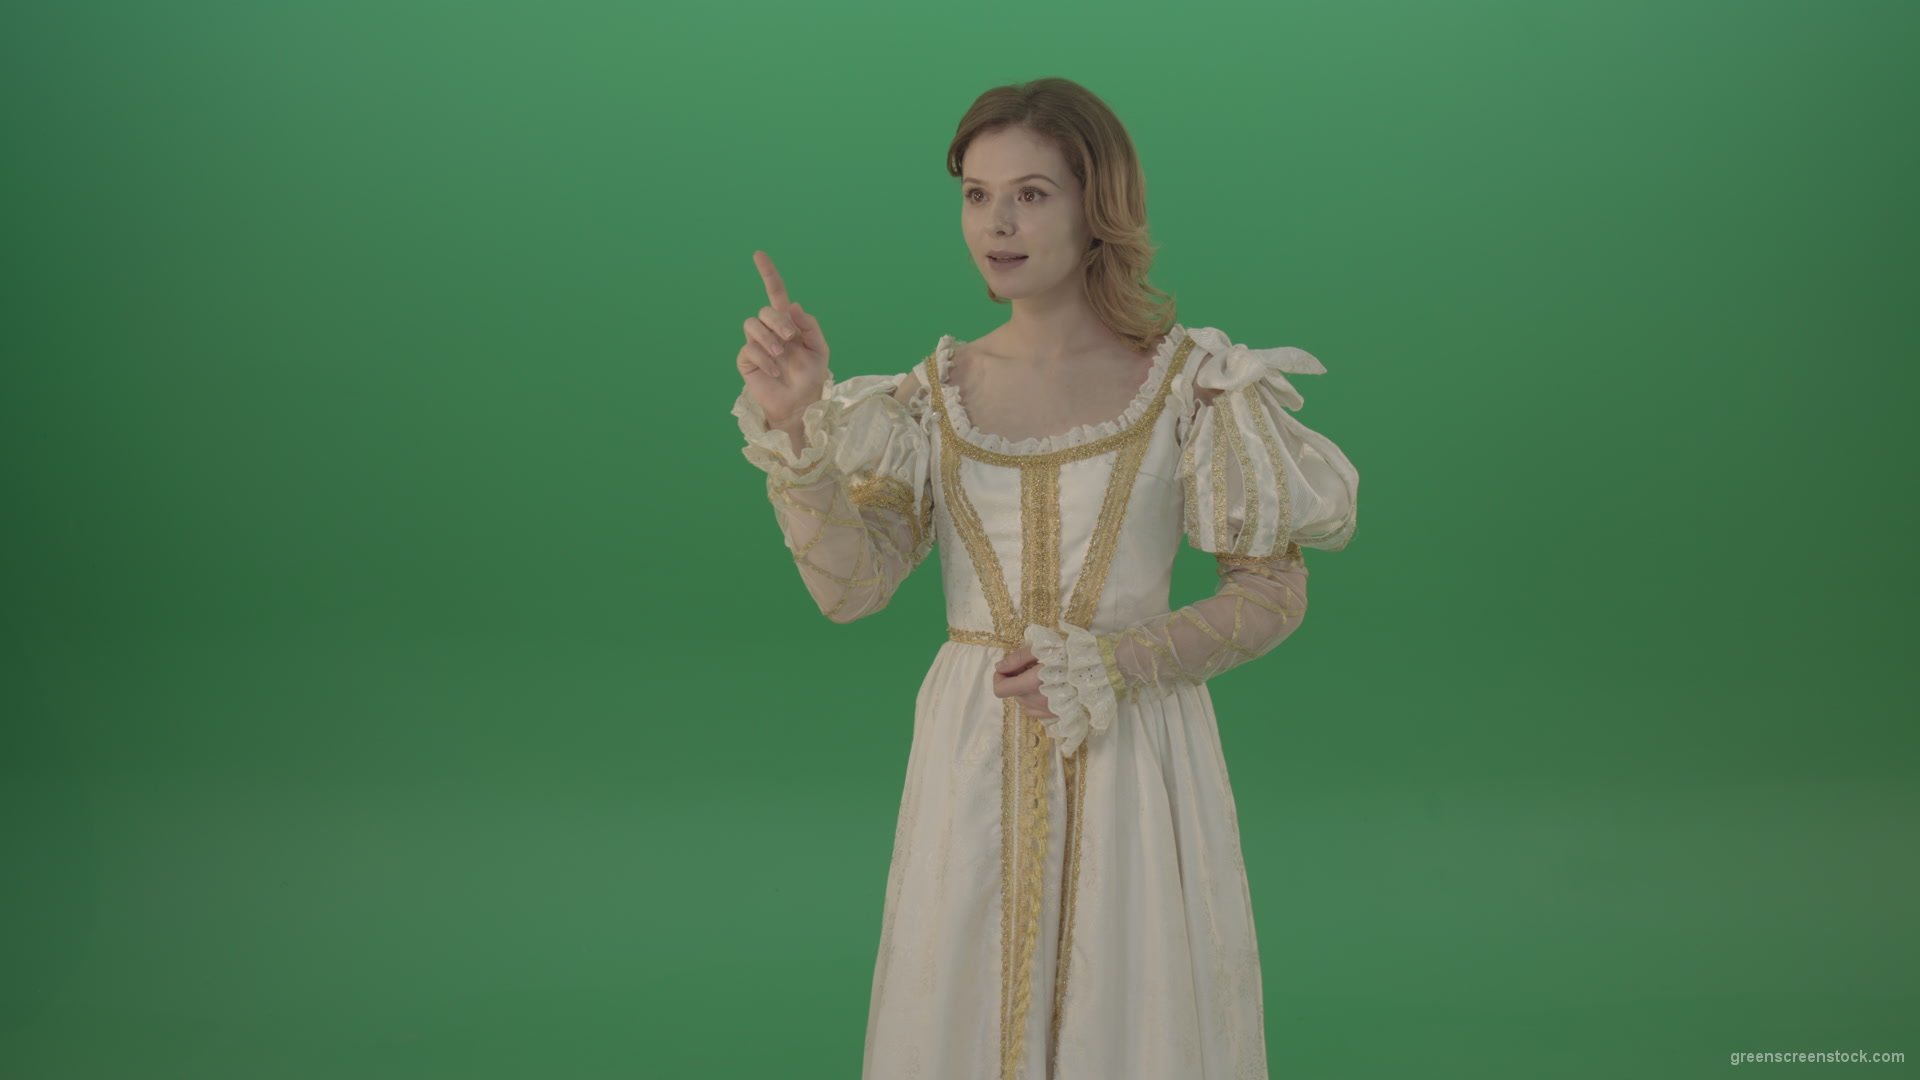 Girl-flips-a-virtual-screen-dressed-in-a-medieval-costume-isolated-on-green-screen_006 Green Screen Stock